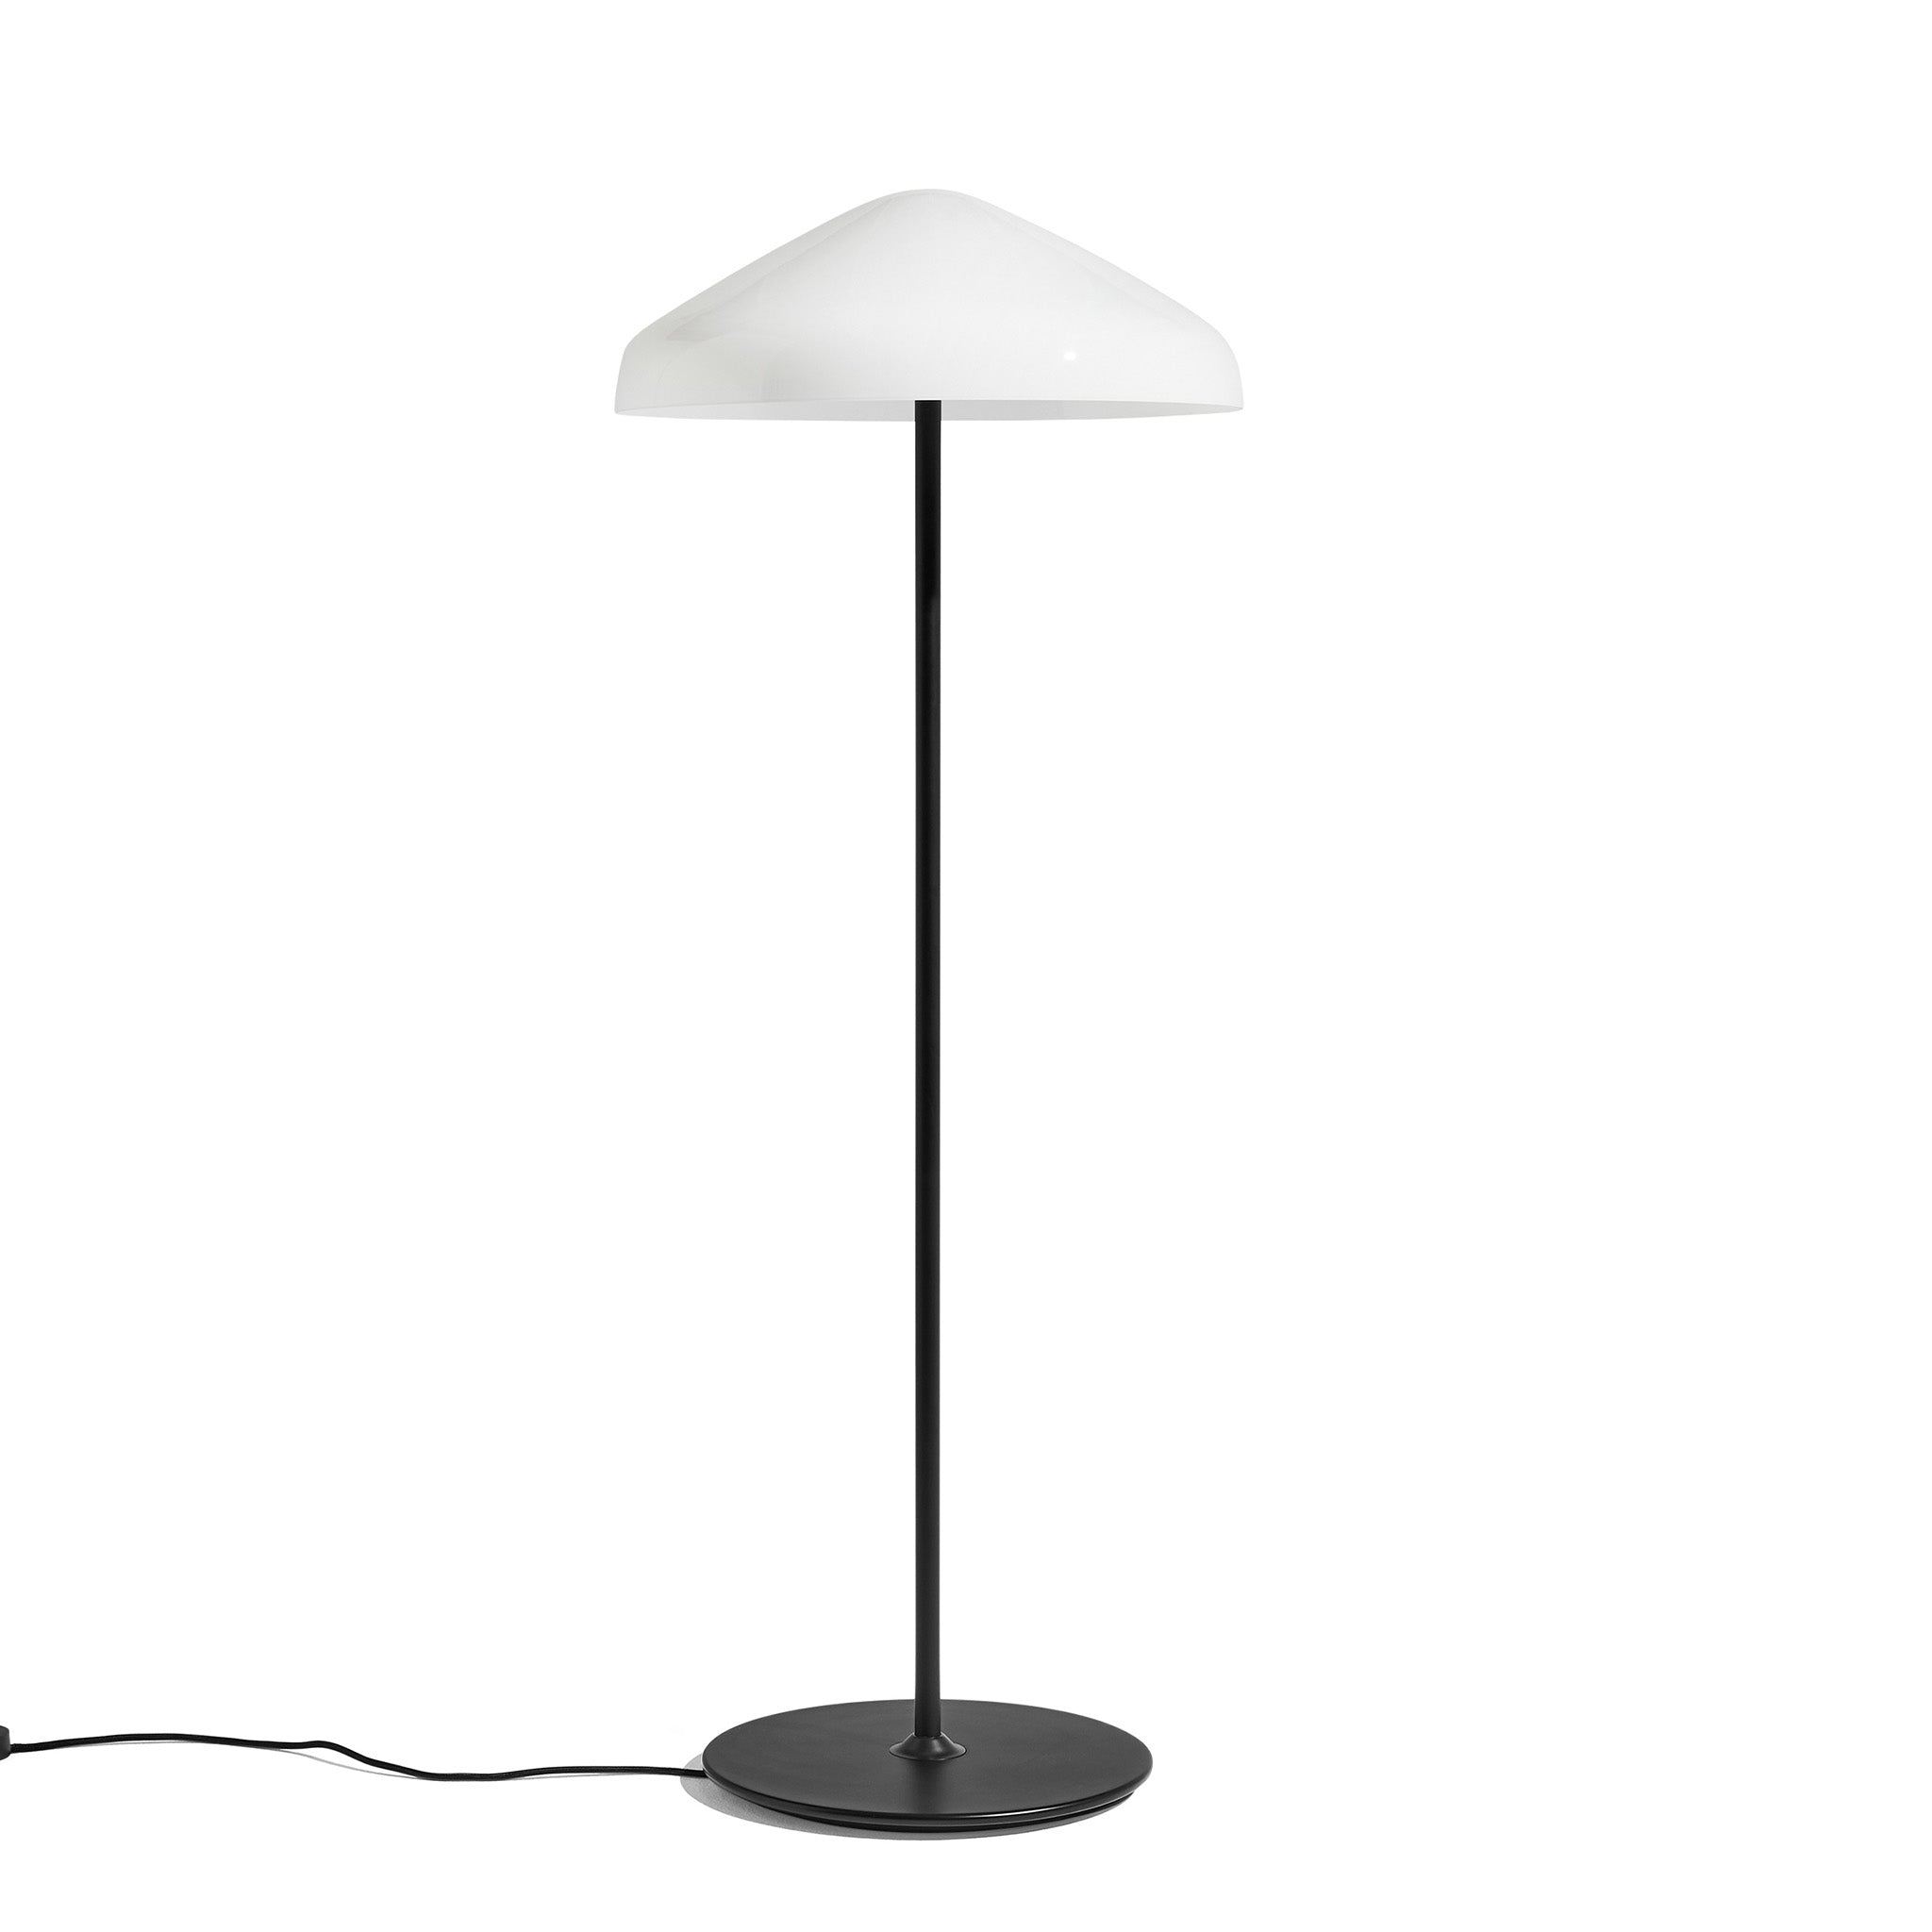 Pao Glass Floor Lamp by Hay